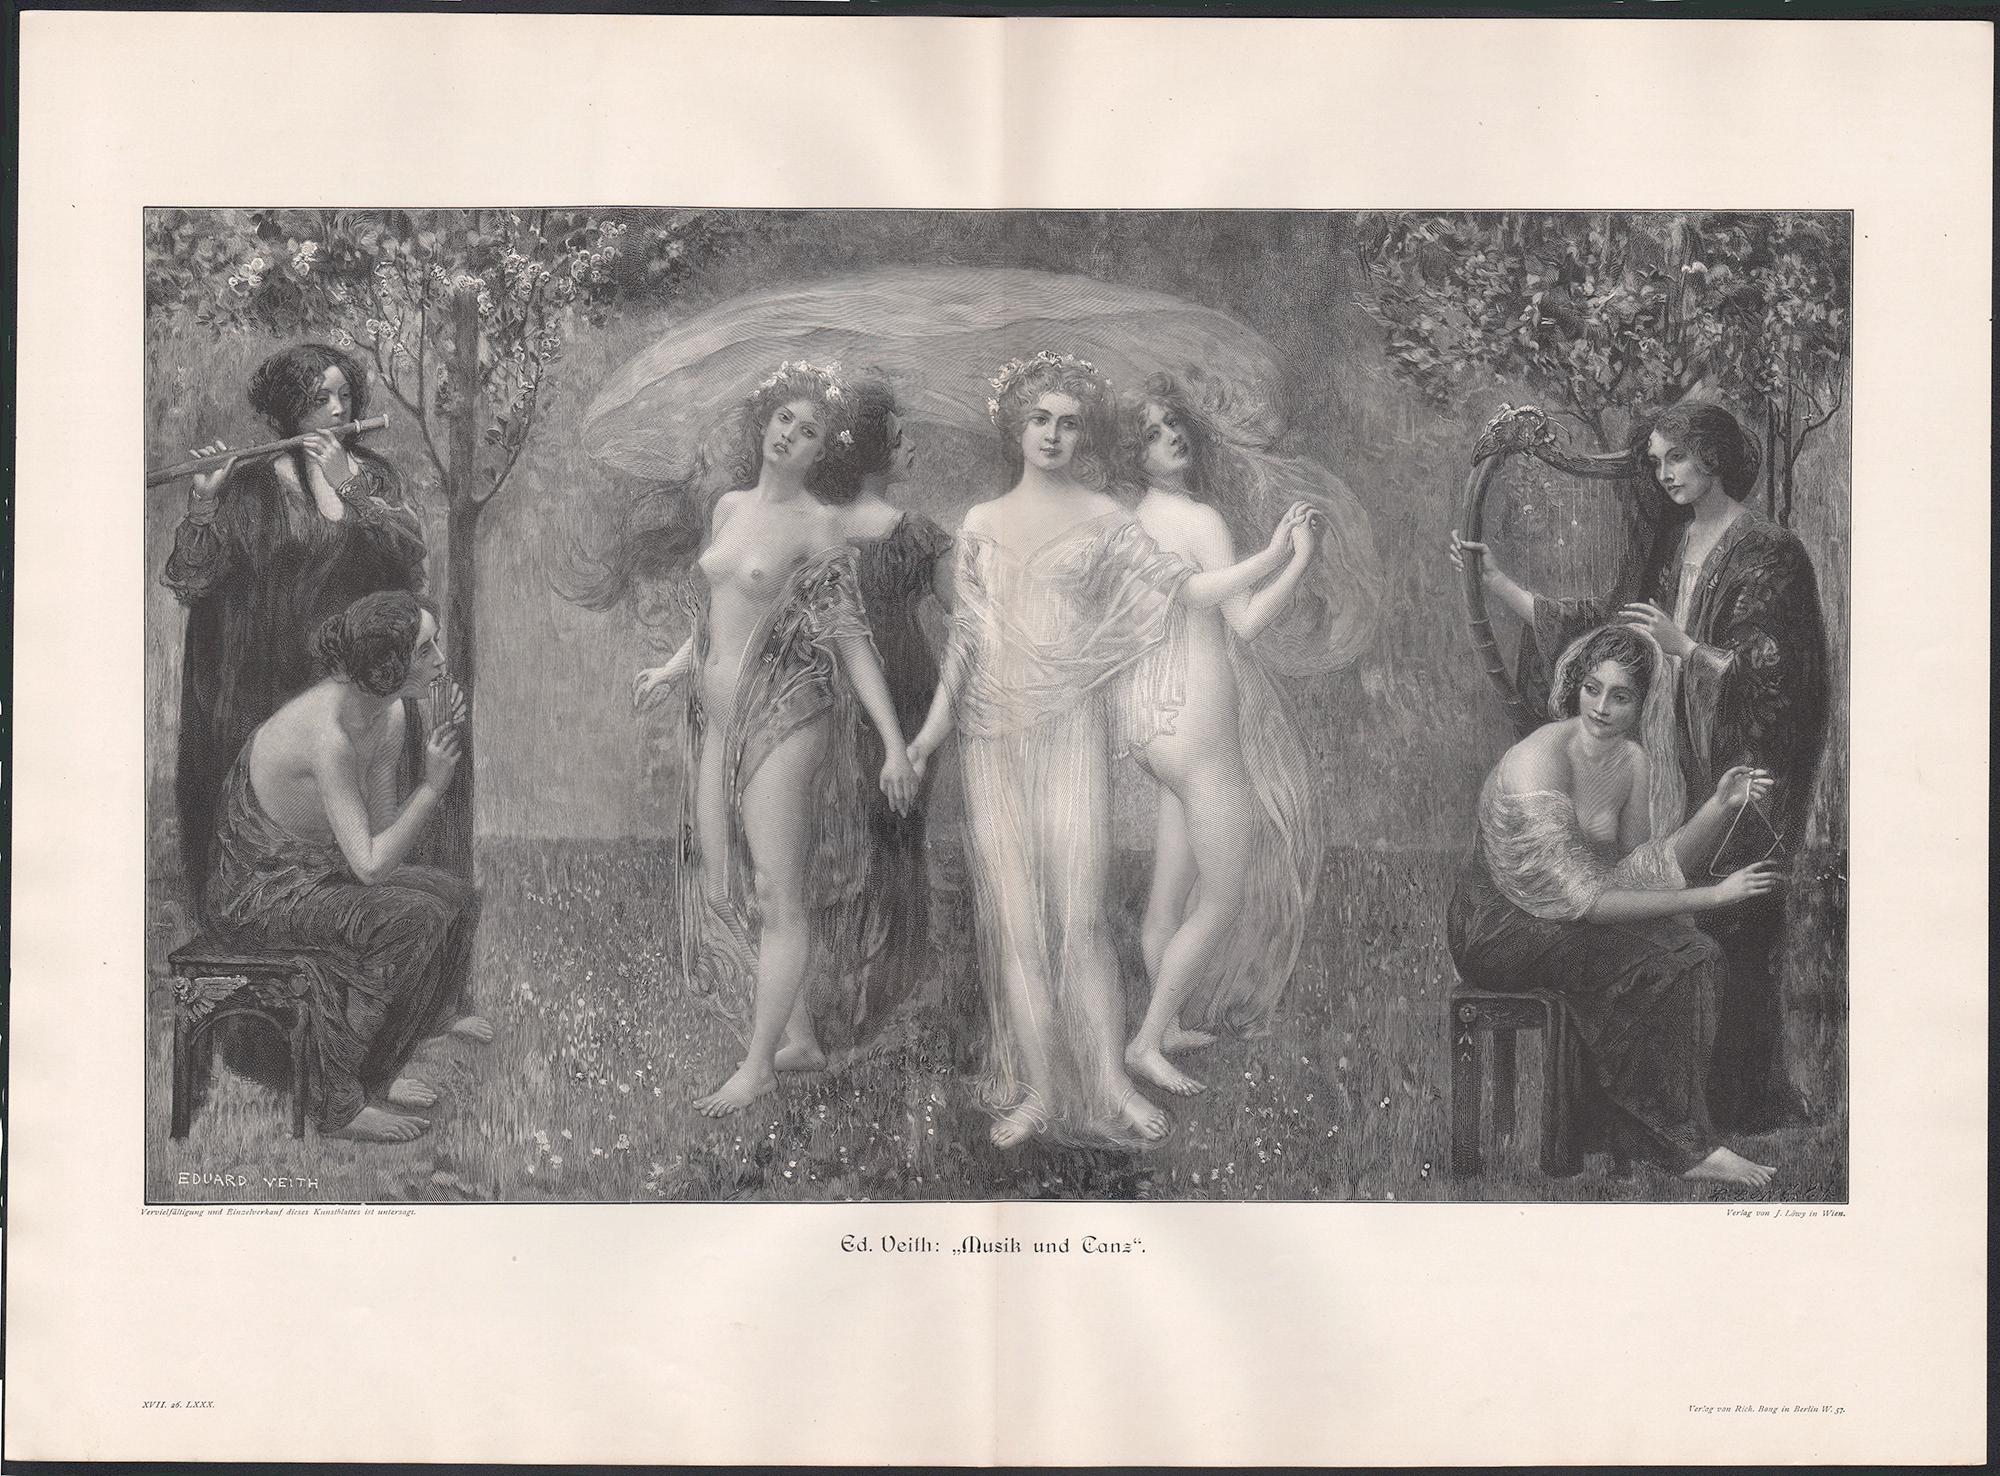 'Musik und Danz'

(Music and Dance)

German  wood-engraving, circa 1895. 

Central vertical fold as issued. 

Eduard Veith was an Austrian portrait painter and stage designer. Many of his works were influenced by Symbolism.

280mm by 480mm (image)